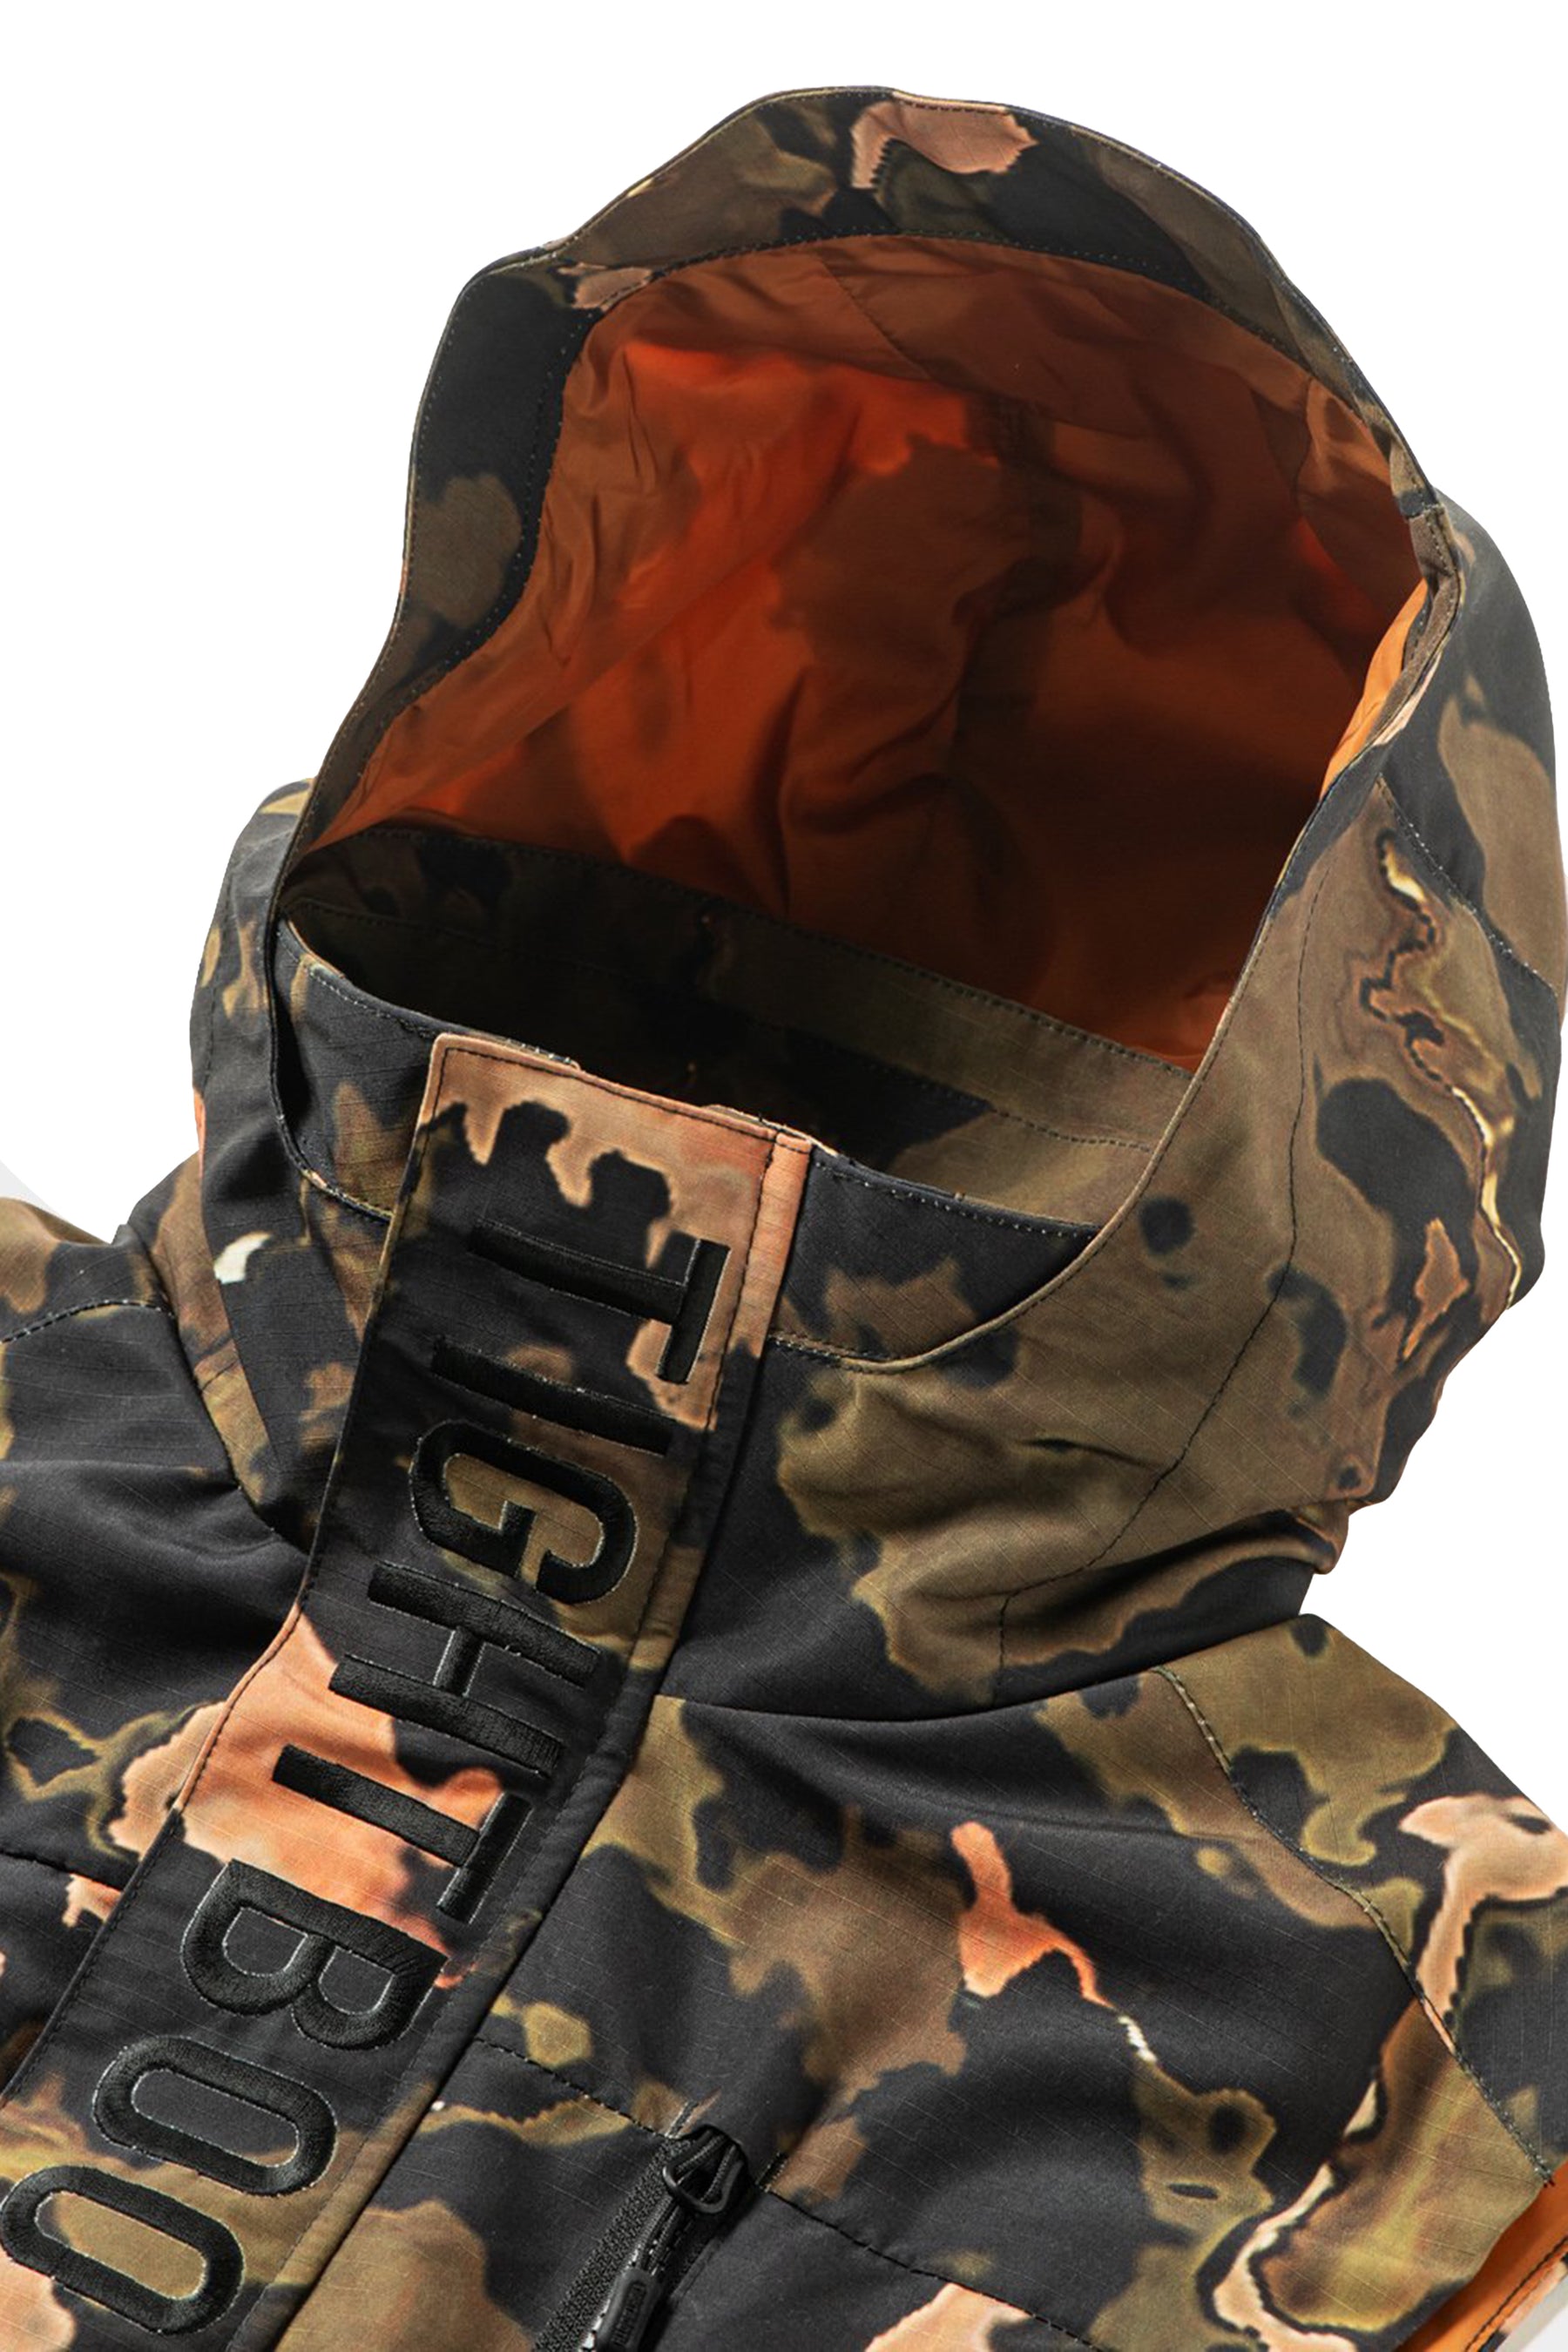 RIPSTOP TACT ICAL VEST / ORG CAMO